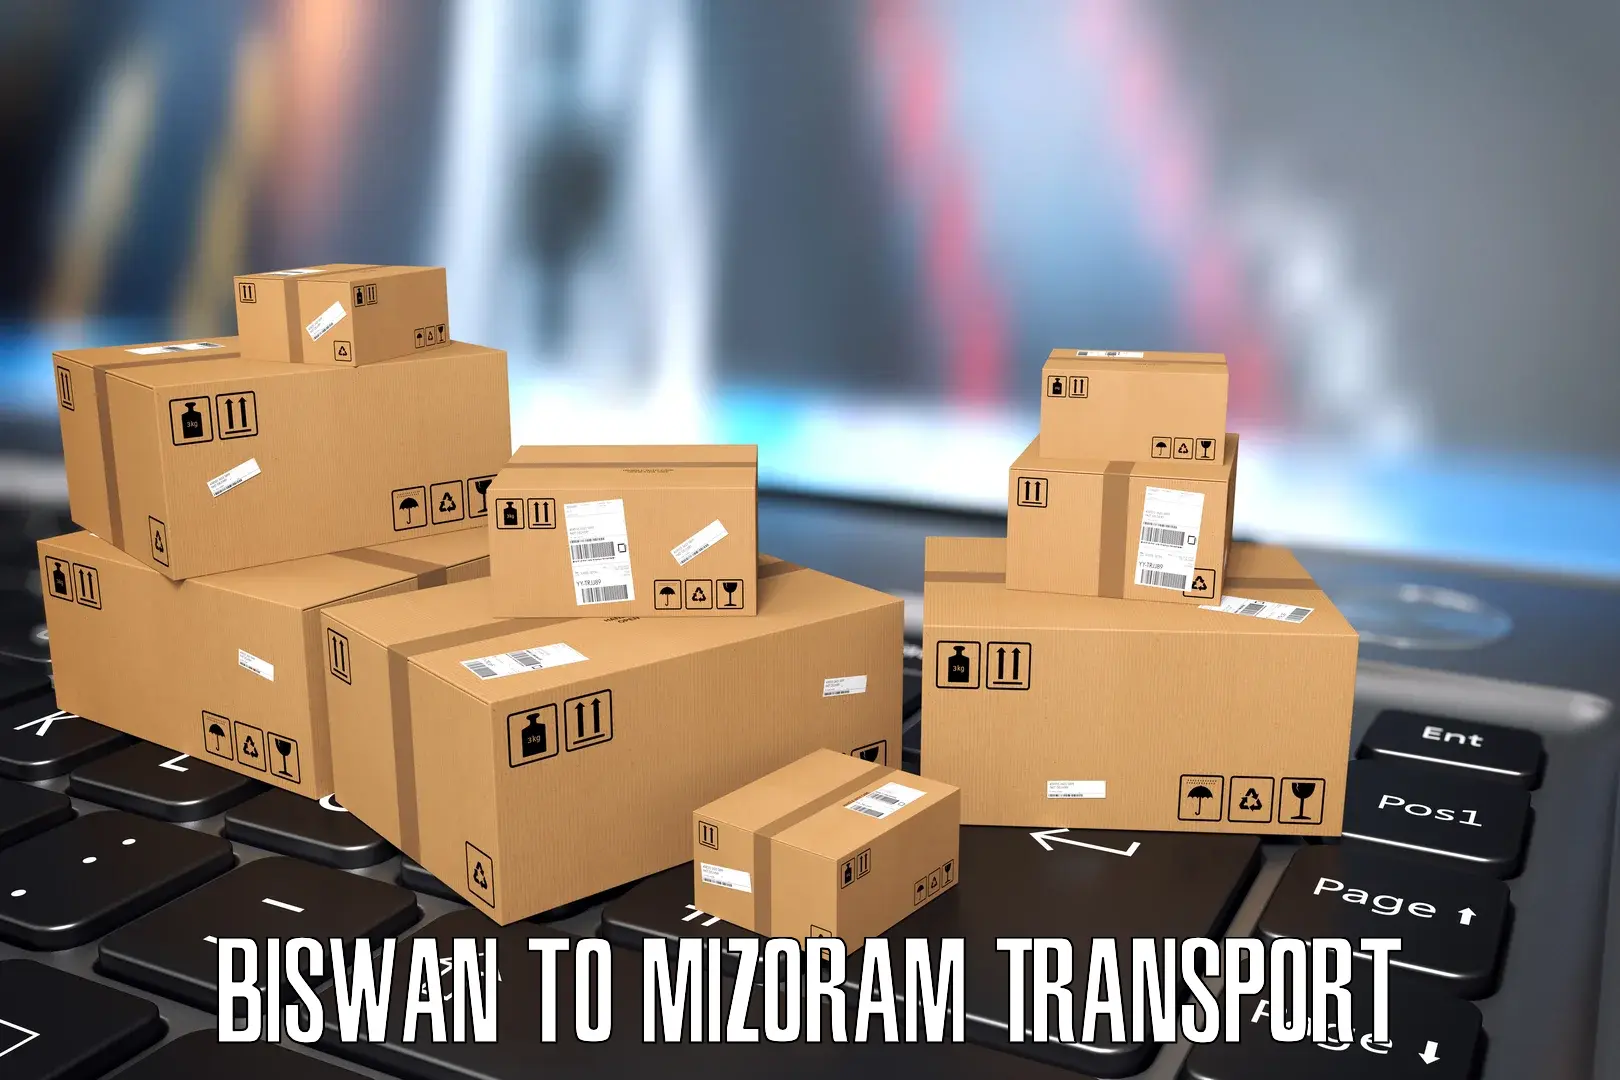 Commercial transport service in Biswan to Darlawn